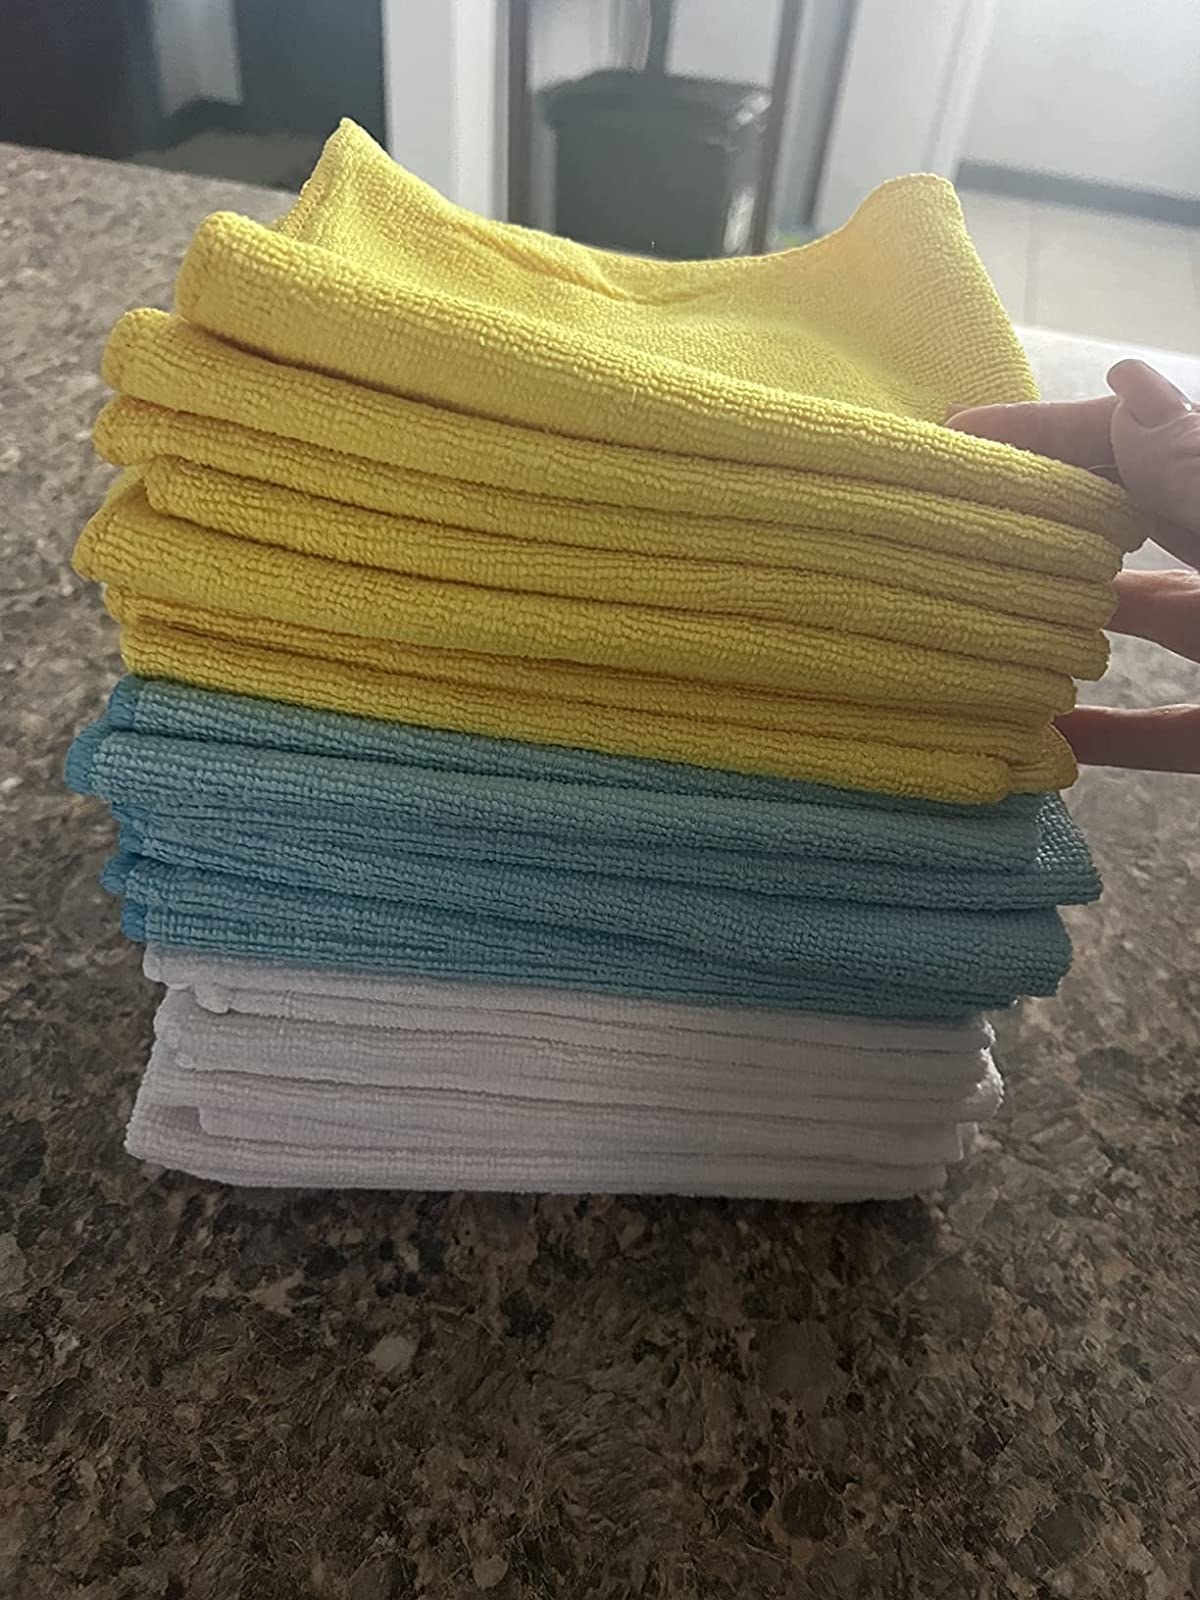 Reviewer image of a stack of microfiber cloths